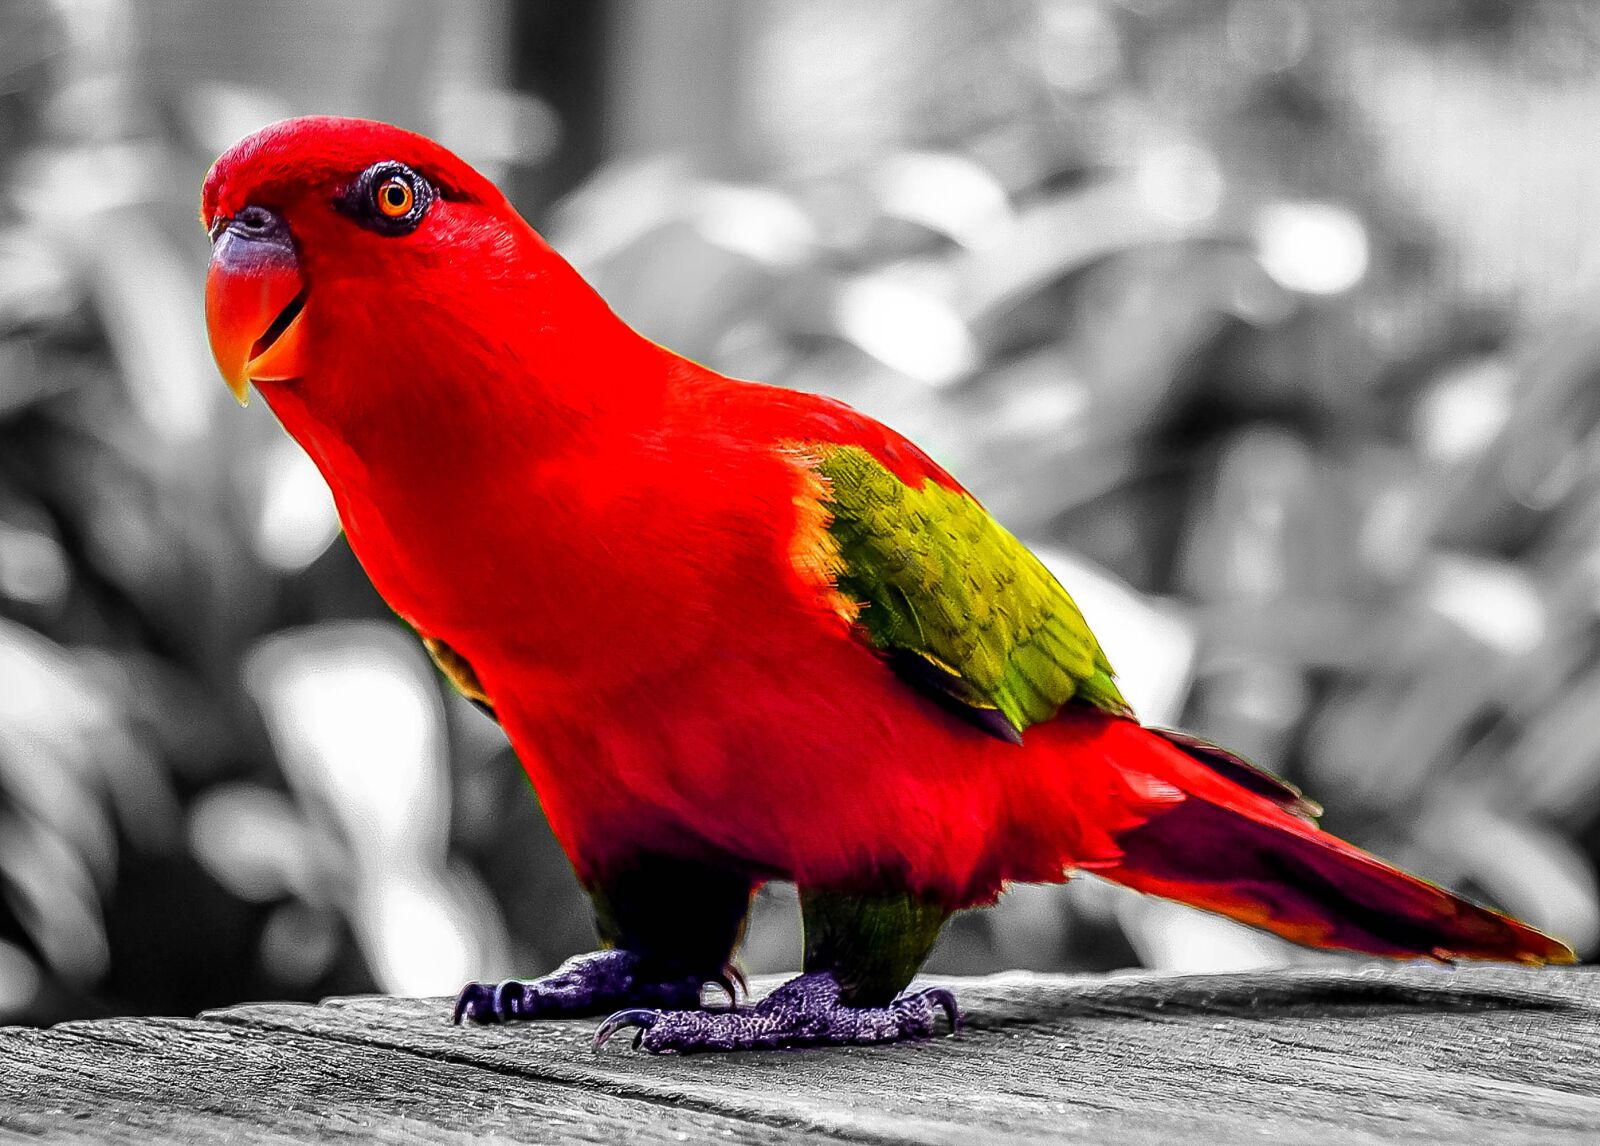 DT 18-270mm F3.5-6.3 sample photo. Parrot, red, bird photography